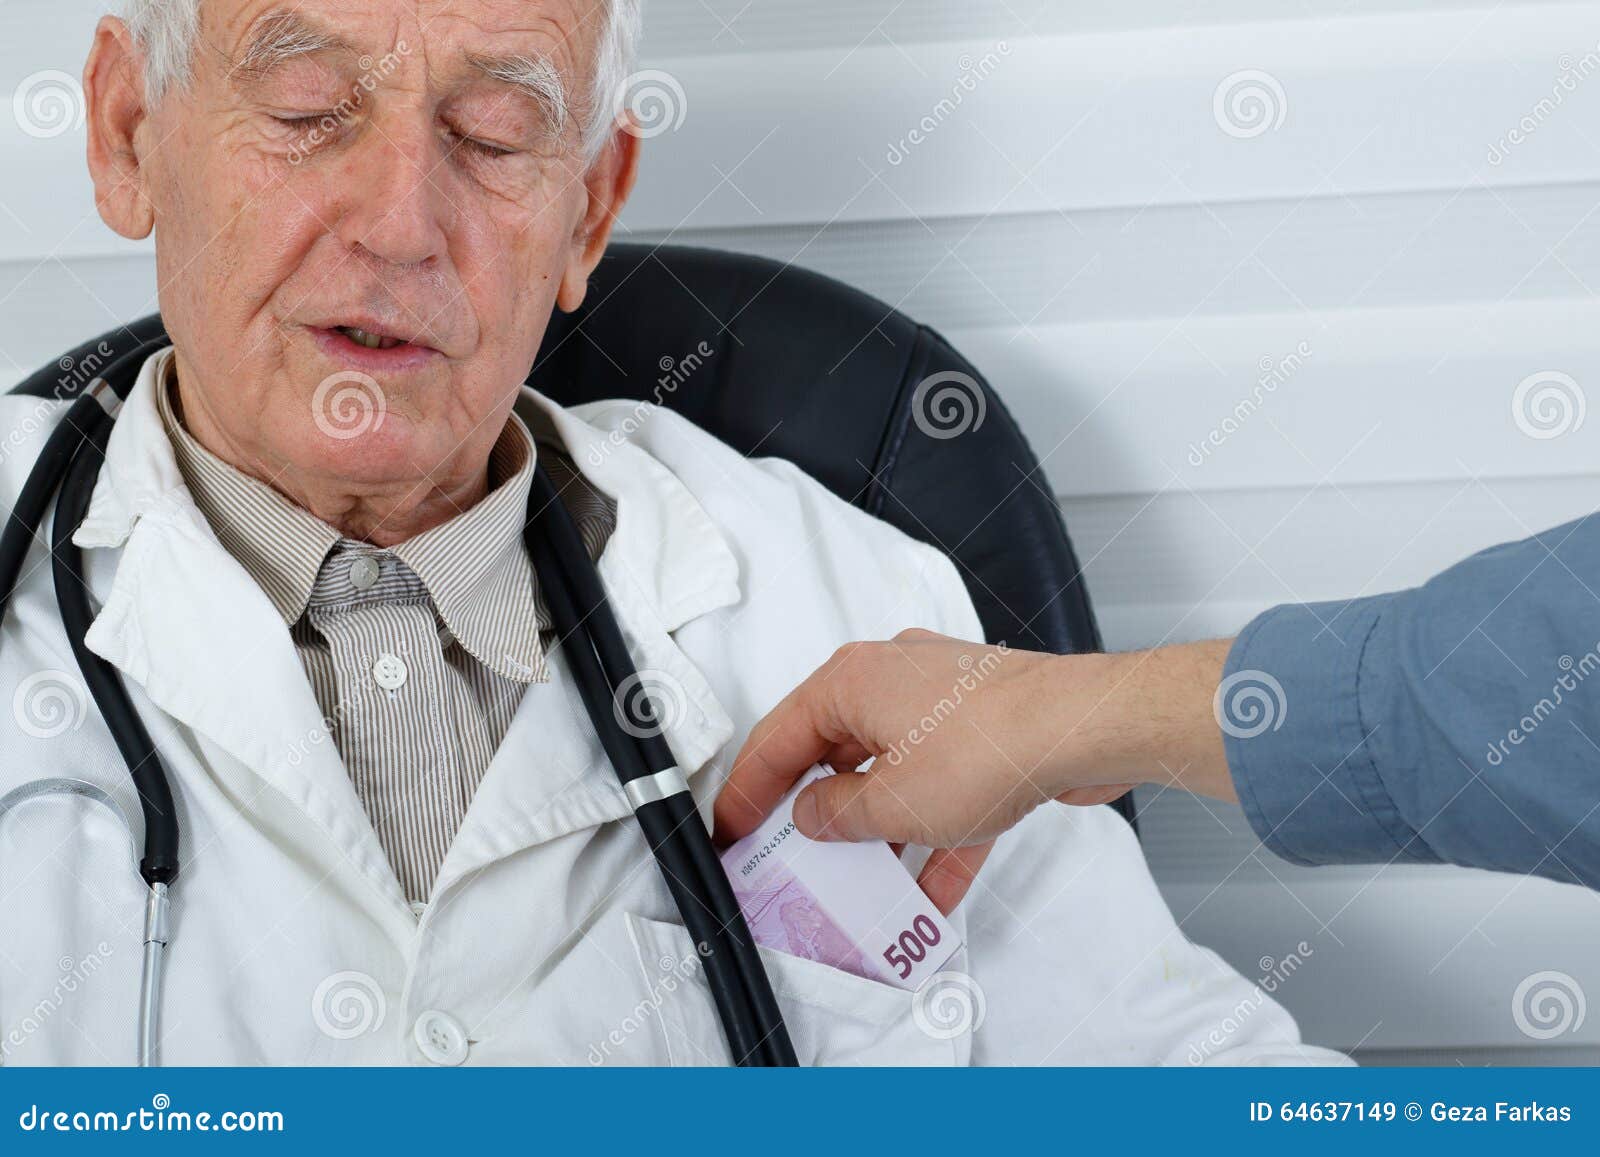 male doctor receiving money from patient